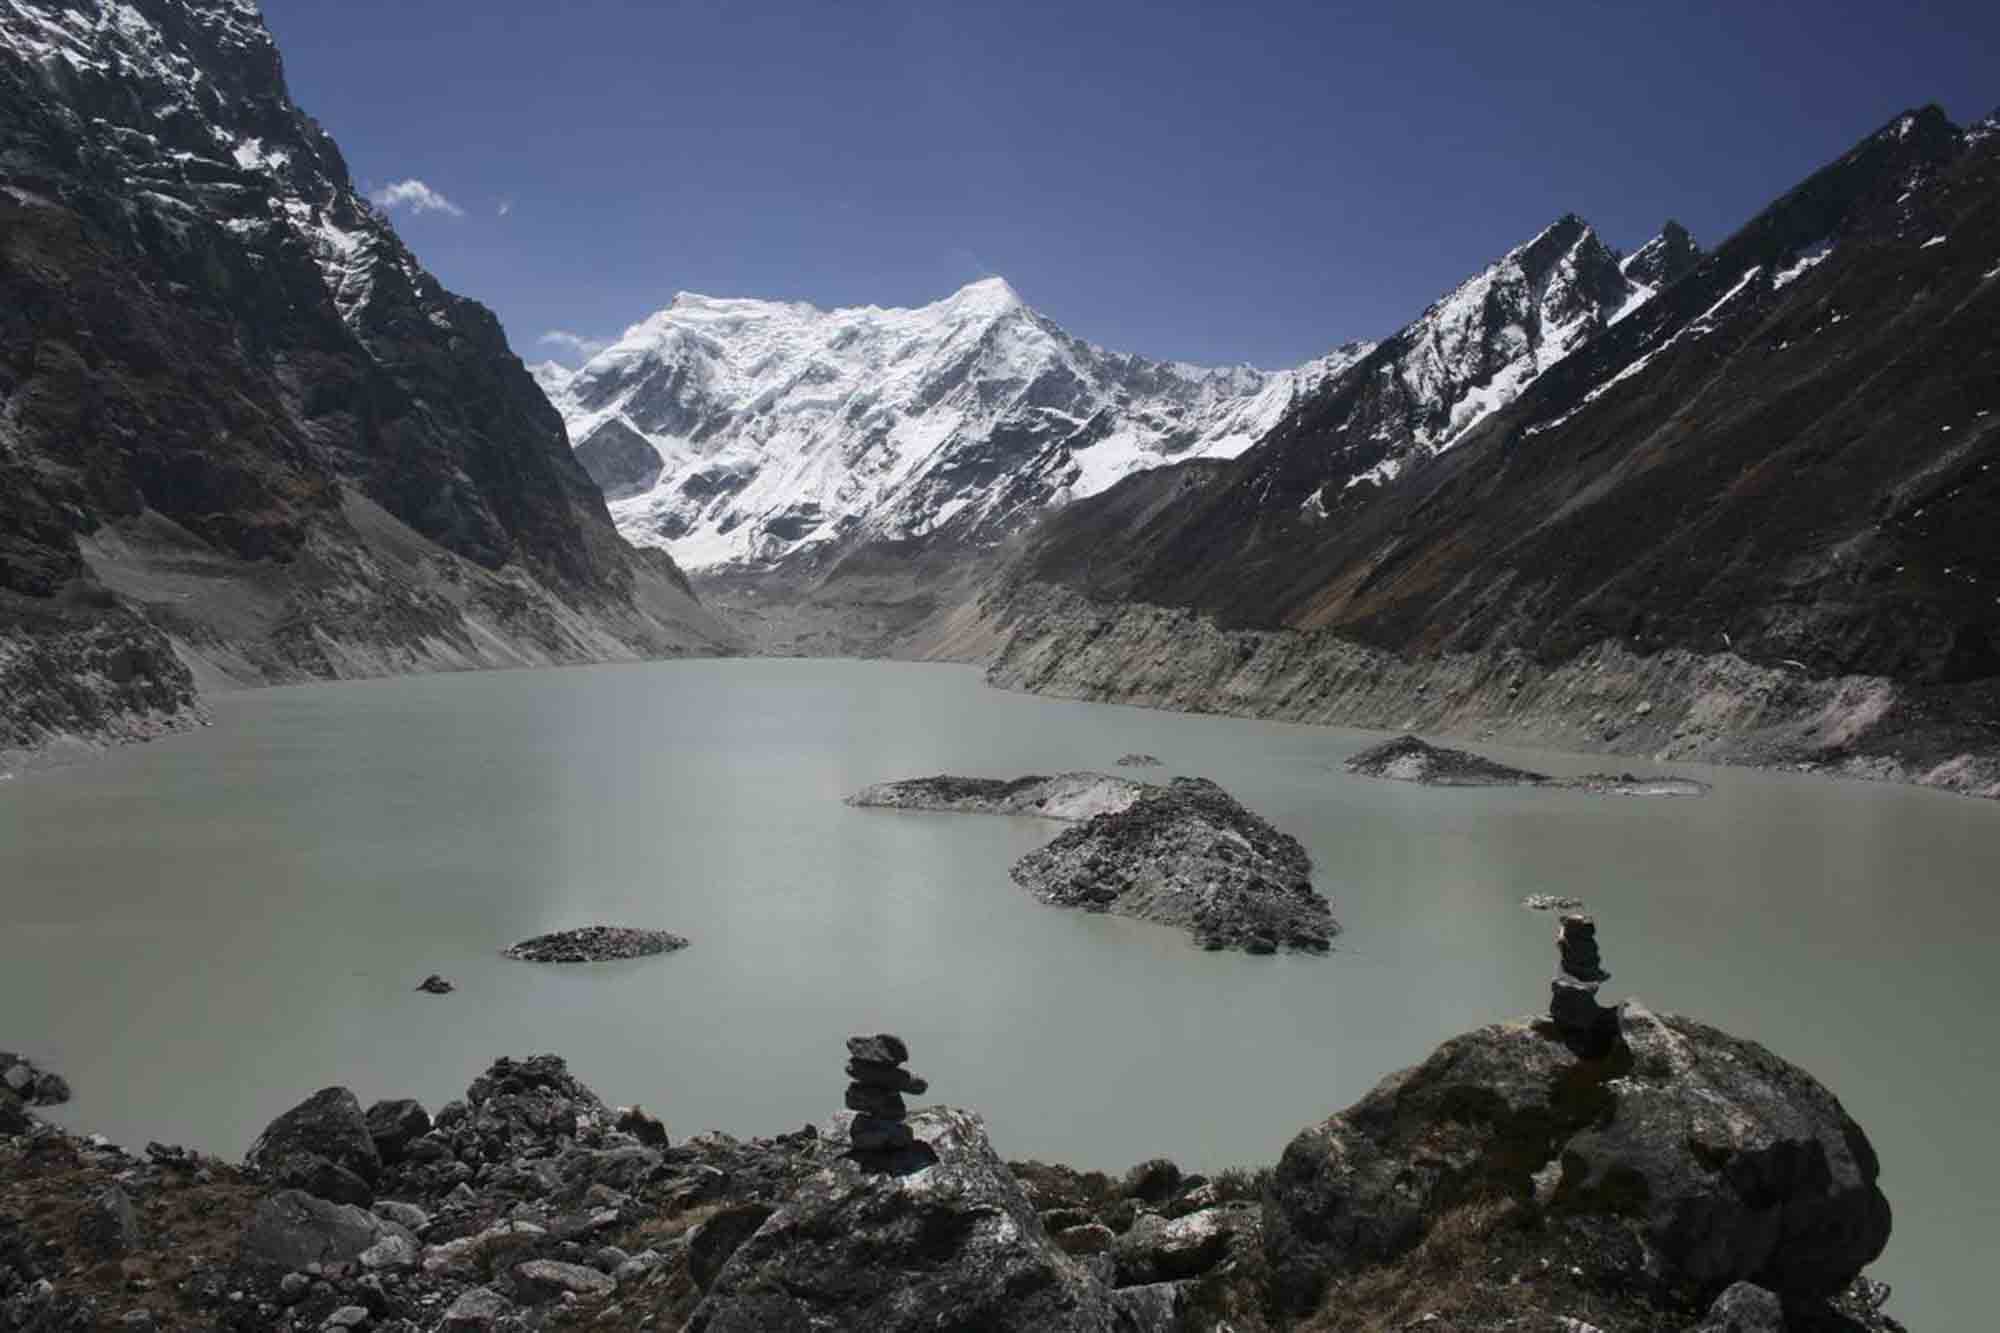 “Tsho Rolpa Glacial Lake: an example of potential threat behind the beautiful glacial lakes in the Rolwalling valley, Nepal. Tsho Rolpa is one of high priority potentially dangerous glacial lakes of Nepal Himalayas. As a result of climate change and fast retreating of glacier; the lake had increased from 0.23 square kilometer to 1.53 square kilometer in the last five decades (Mool et al. 2010, Press). The fast retreating glaciers and adjoining glacial lakes increasing the threats of glacial lake outburst flood (GLOF). GLOFs most likely would cause extensive effects on the downstream pose a threat to human lives and properties.” 10th May 2010. Dolakha, Nepal.